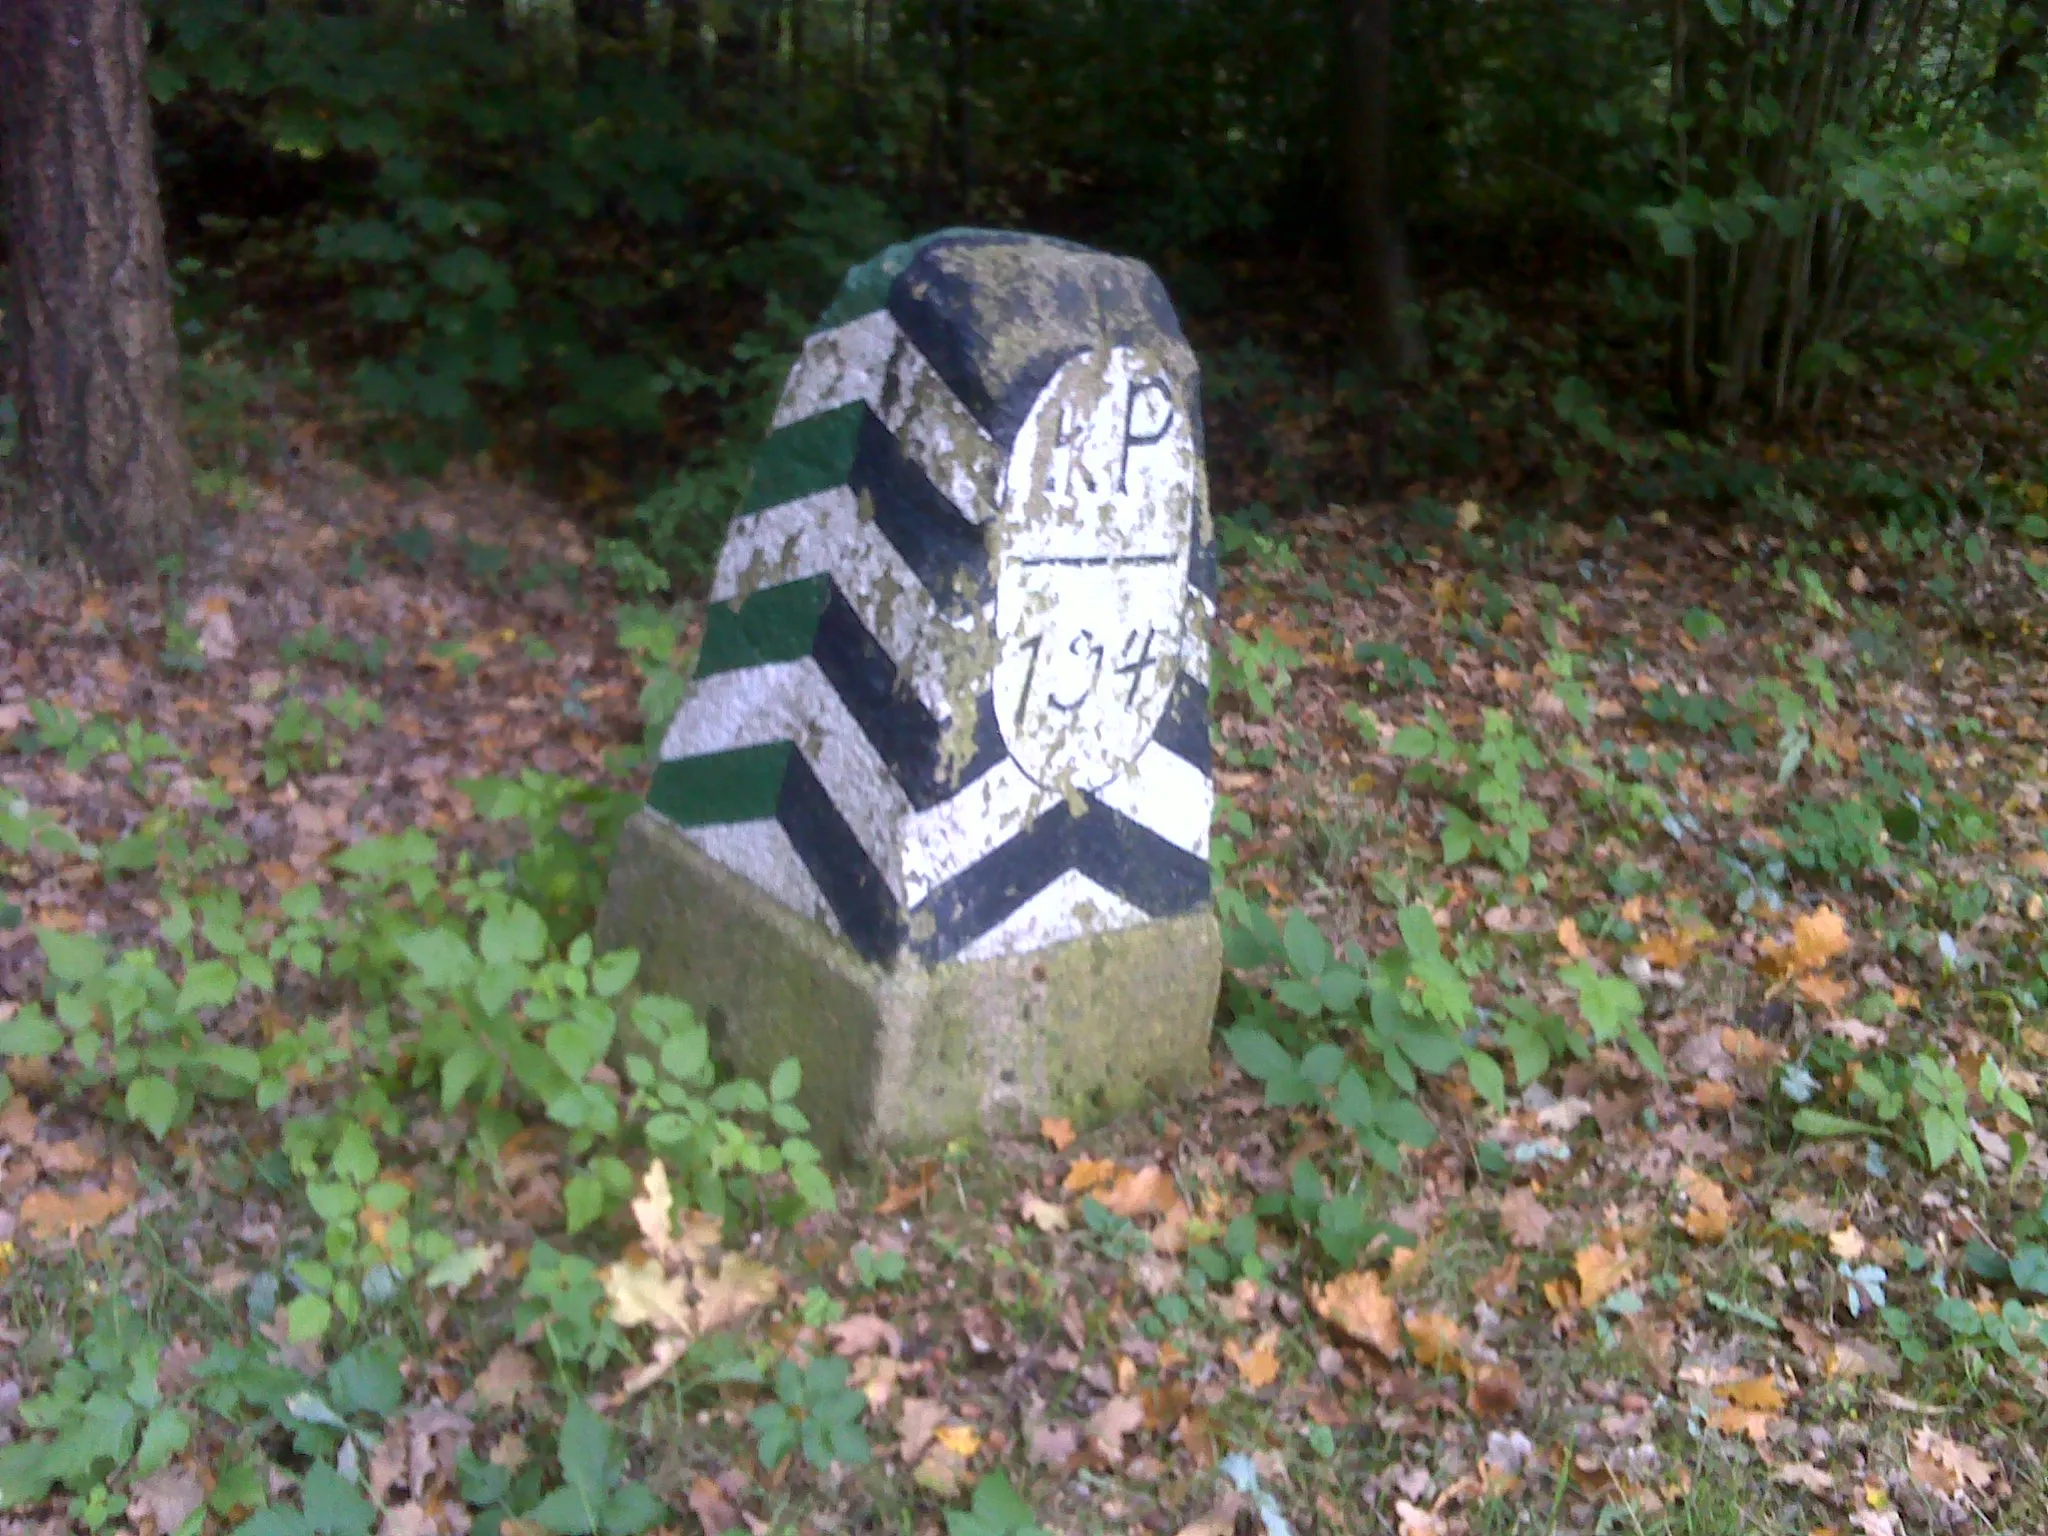 Photo showing: This media shows the protected monument of Saxony with the ID 09303164 KDSa/09303164(other).